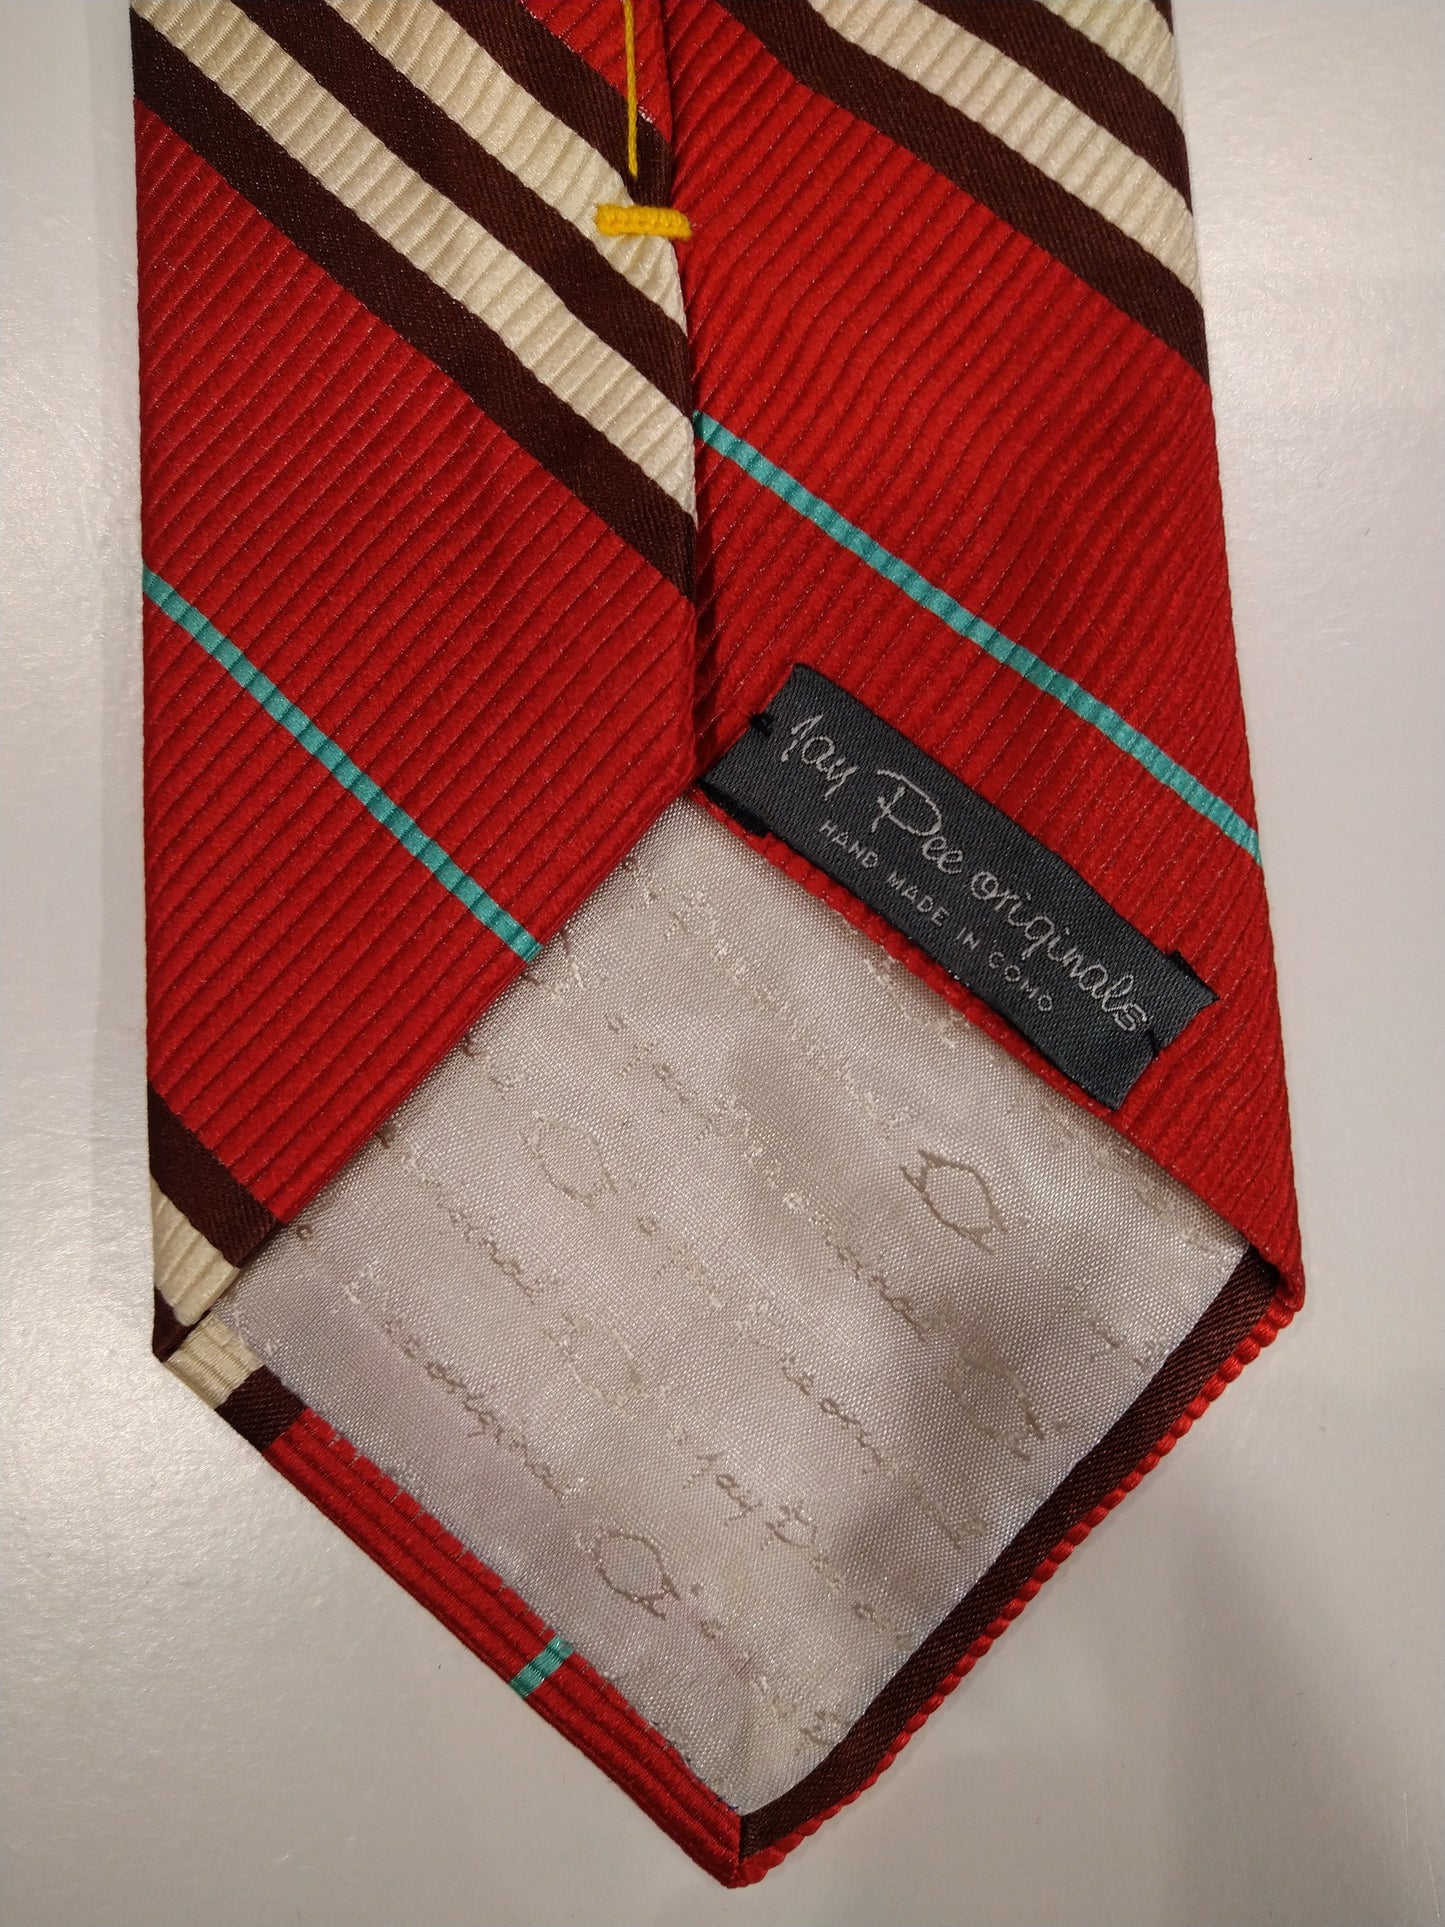 Jay Pee Original Hand Made in Como Silk Tie. Red / brown / white / blue striped.